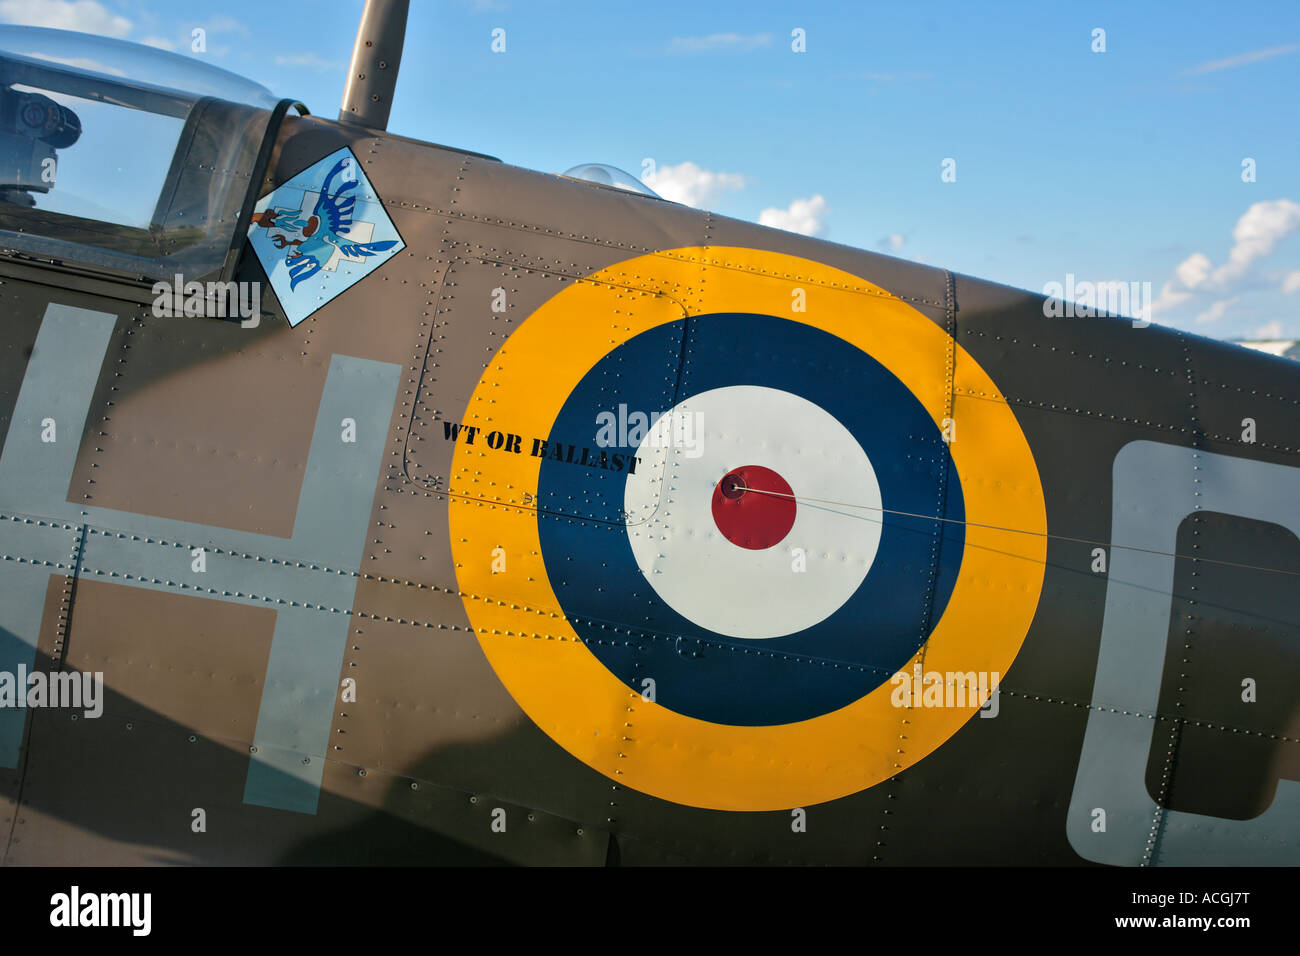 Spitfire detail showing Polish Squadron logo RAF roundel and wt or ballast sign Stock Photo